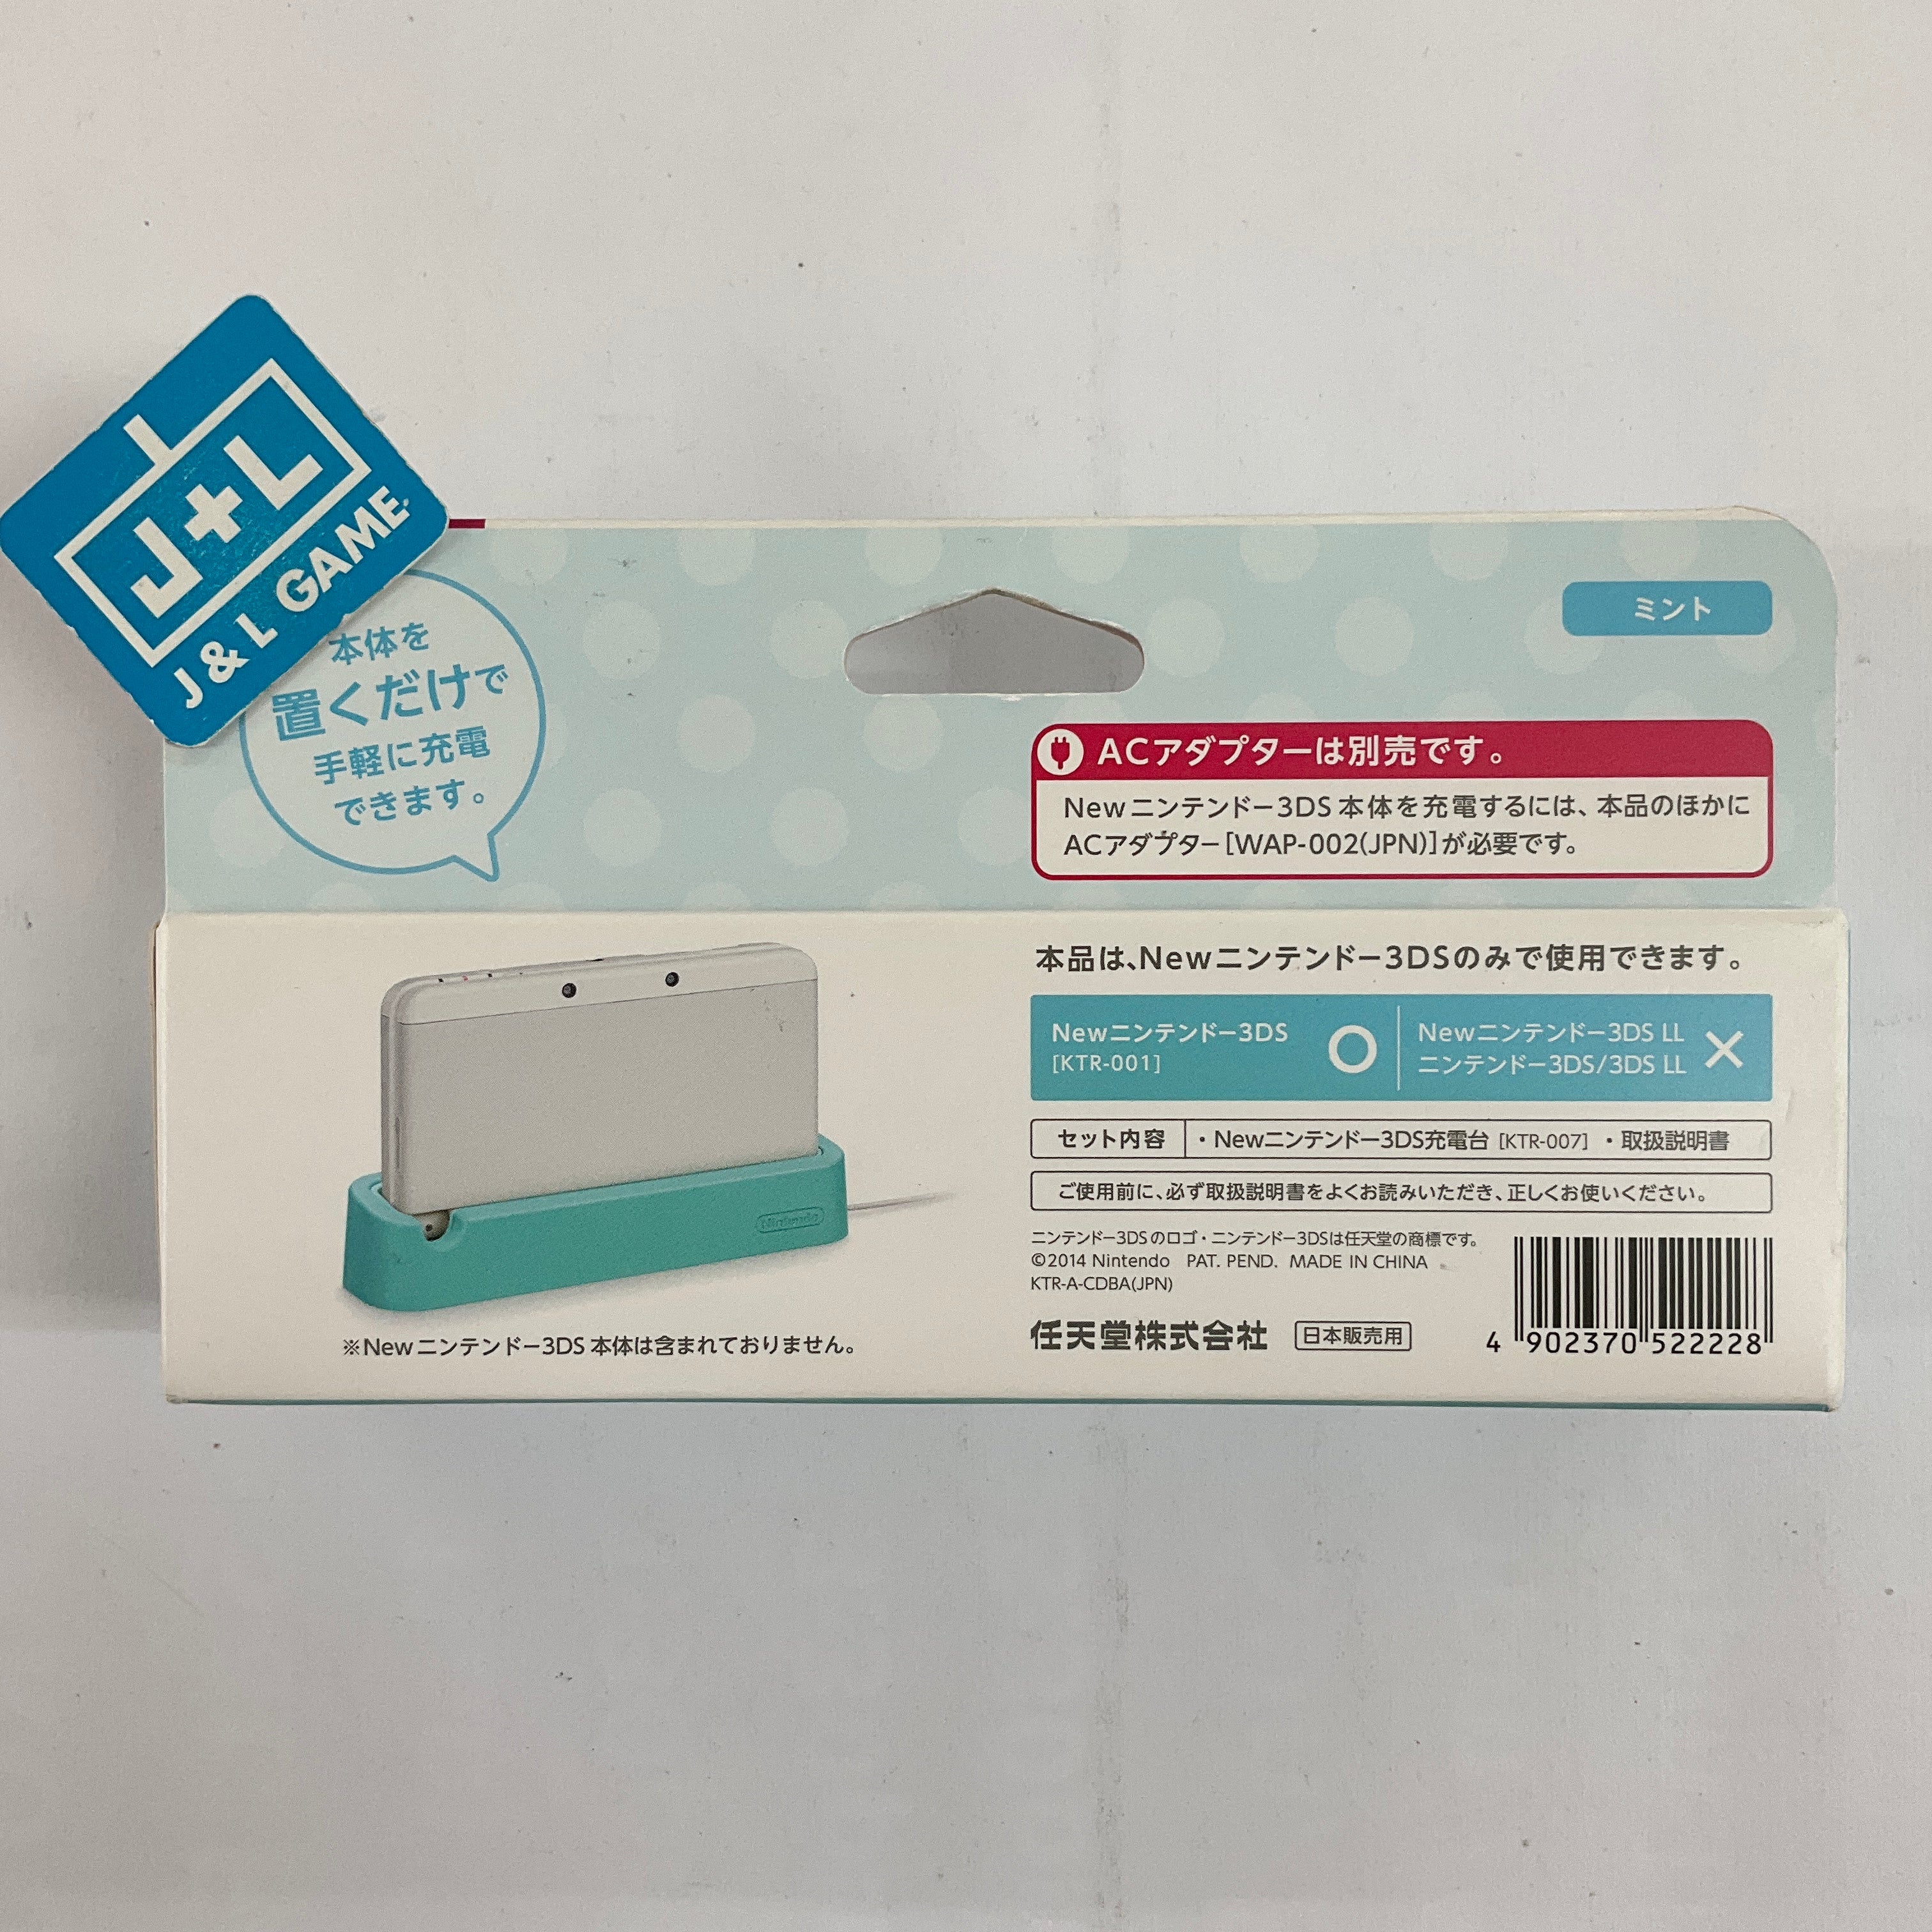 New Nintendo 3DS Charging Stand (Mint) - Nintendo 3DS (Japanese Import) Accessories Nintendo   